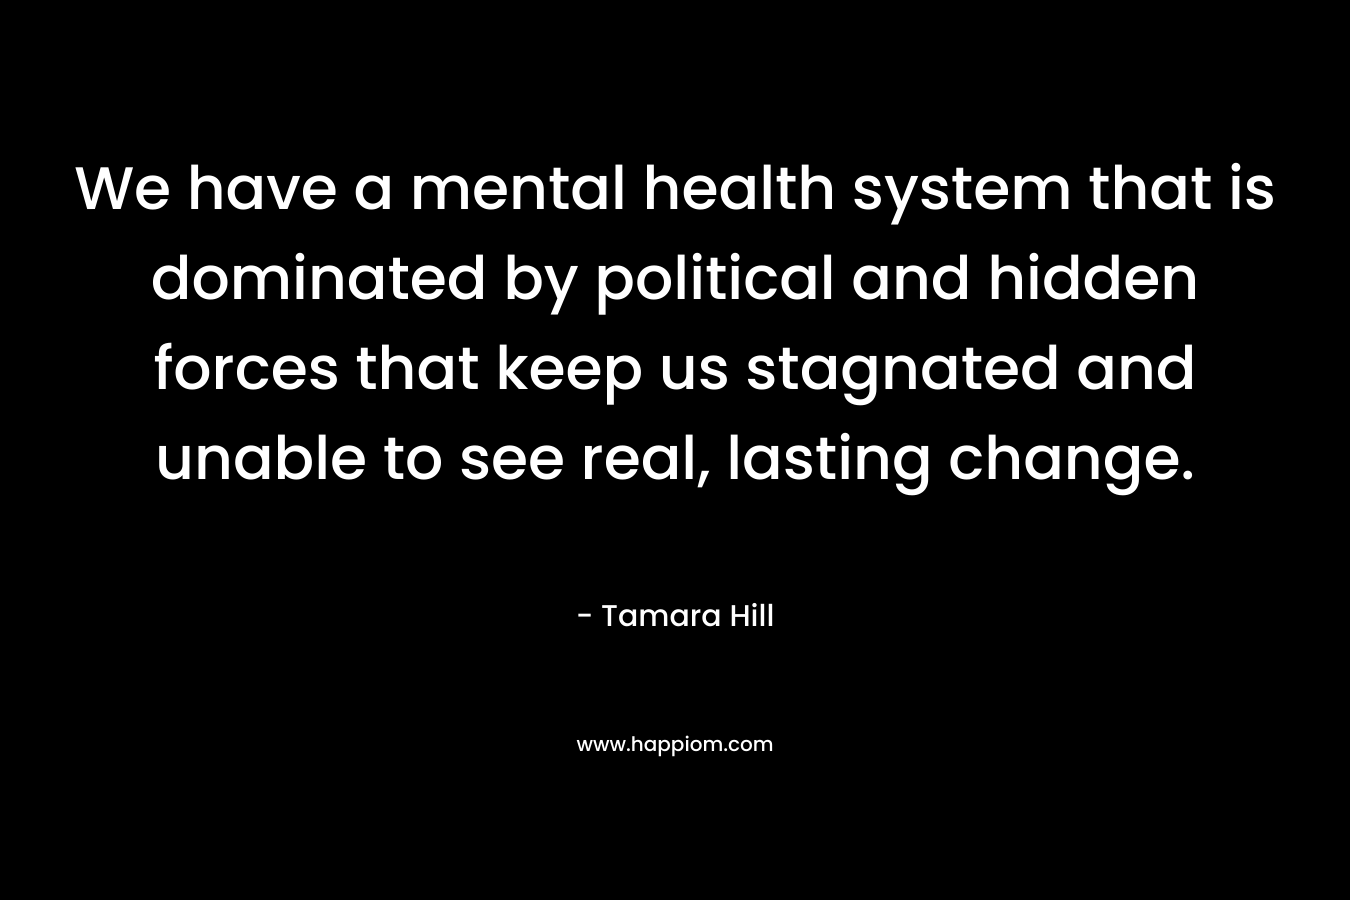 We have a mental health system that is dominated by political and hidden forces that keep us stagnated and unable to see real, lasting change. – Tamara  Hill